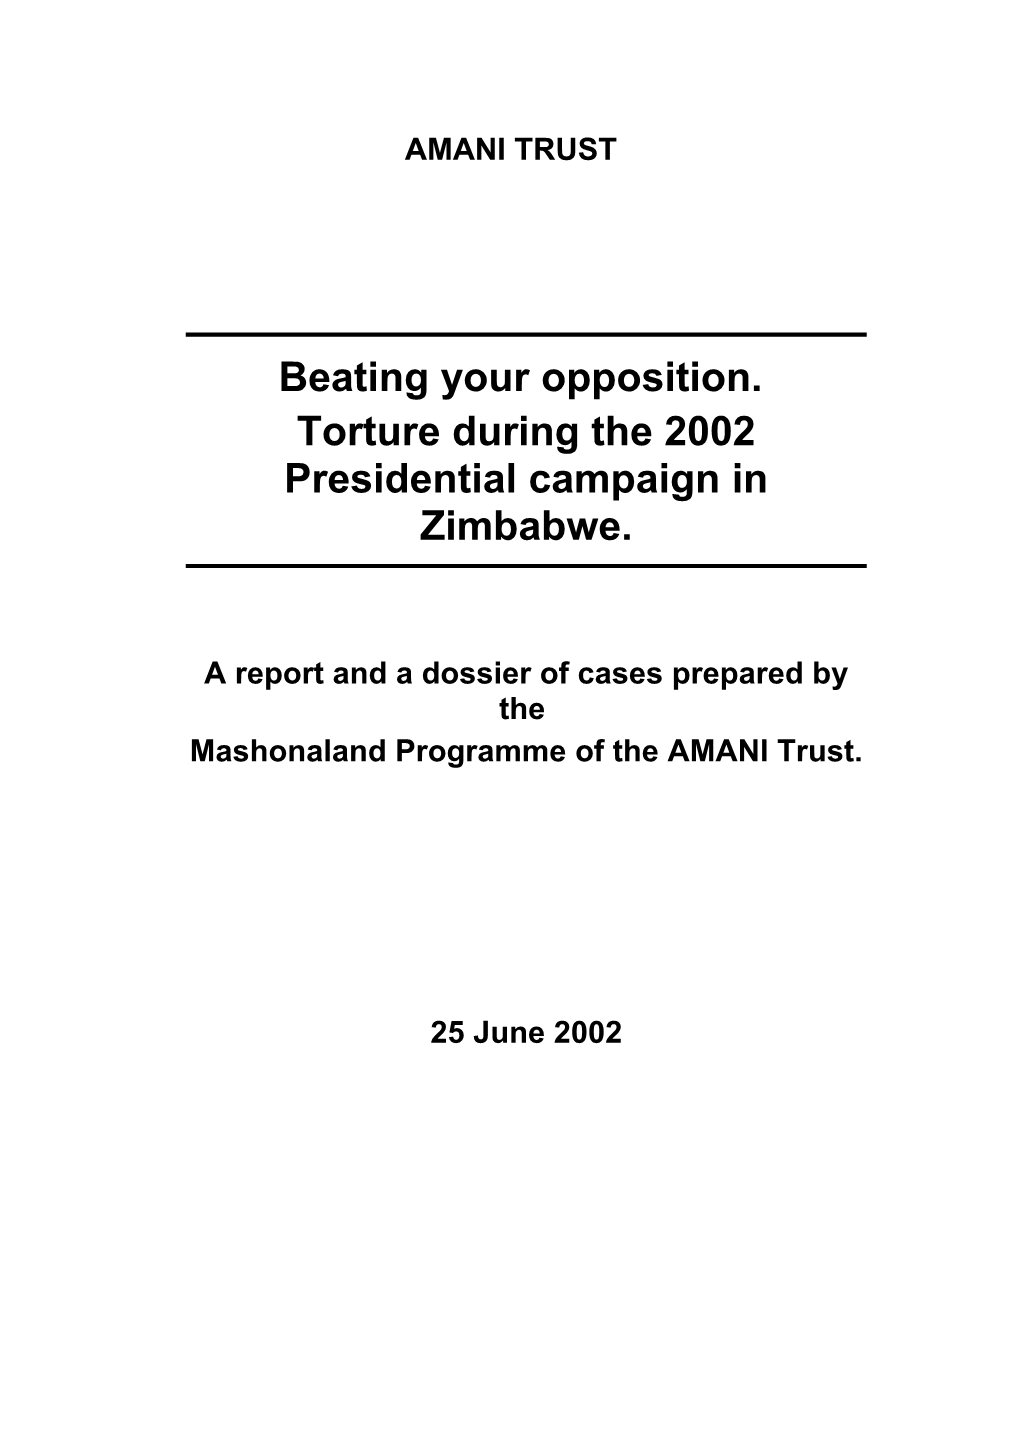 Torture During the 2002 Presidential Campaign in Zimbabwe